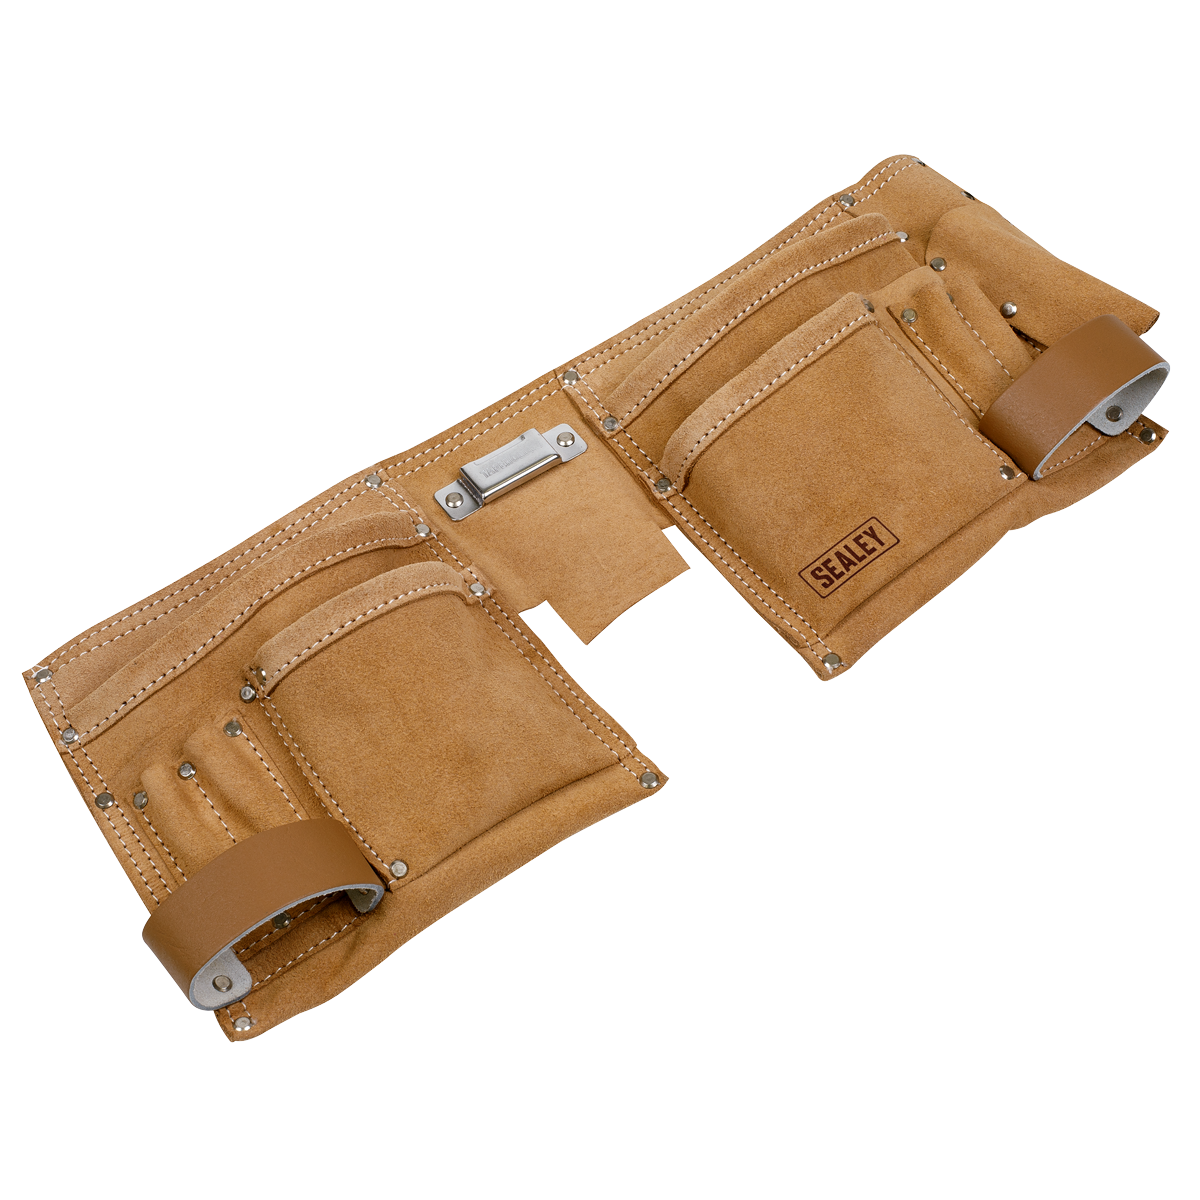 Sealey Double Pouch Leather Tool Belt